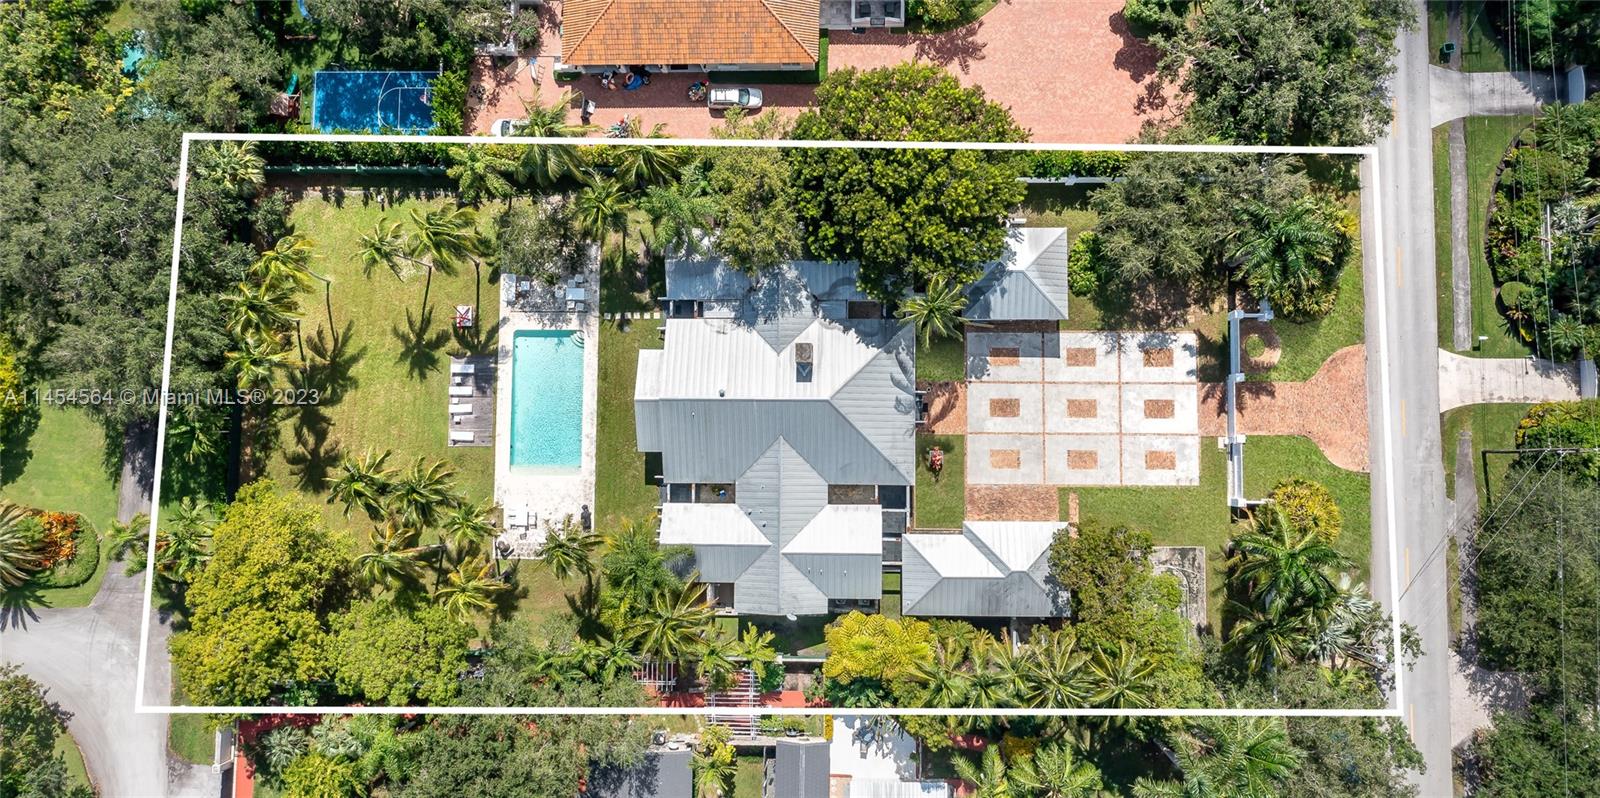 Key West style estate, situated on a sprawling 1-acre street to street lot in the desirable CORAL GABLES neighborhood. This 7,174 SF Total single-story home, 7 beds, 8.5 baths & 3-car garage, WITH HEIGHT TO FIT LIFT UP TO 6 CARS, which is any car collector's dream. Its prime location near top-rated schools, Gulliver, Carrollton, Ransom, and more. This Multi-Generational home is perfect for In-laws/professional kids returning home, with 3 detached rooms: office w onsite bath, 2 Beds w a sharing bath. The kitchen is complete w top-of-the-line appliances. The primary suite offers a spa-like bath & outside shower. Each of the 4 beds have en-suite baths. The outdoor area is an entertainer's paradise, featuring a covered terrace, a pickleball court, and a stunning pool w a detached cabana bath.